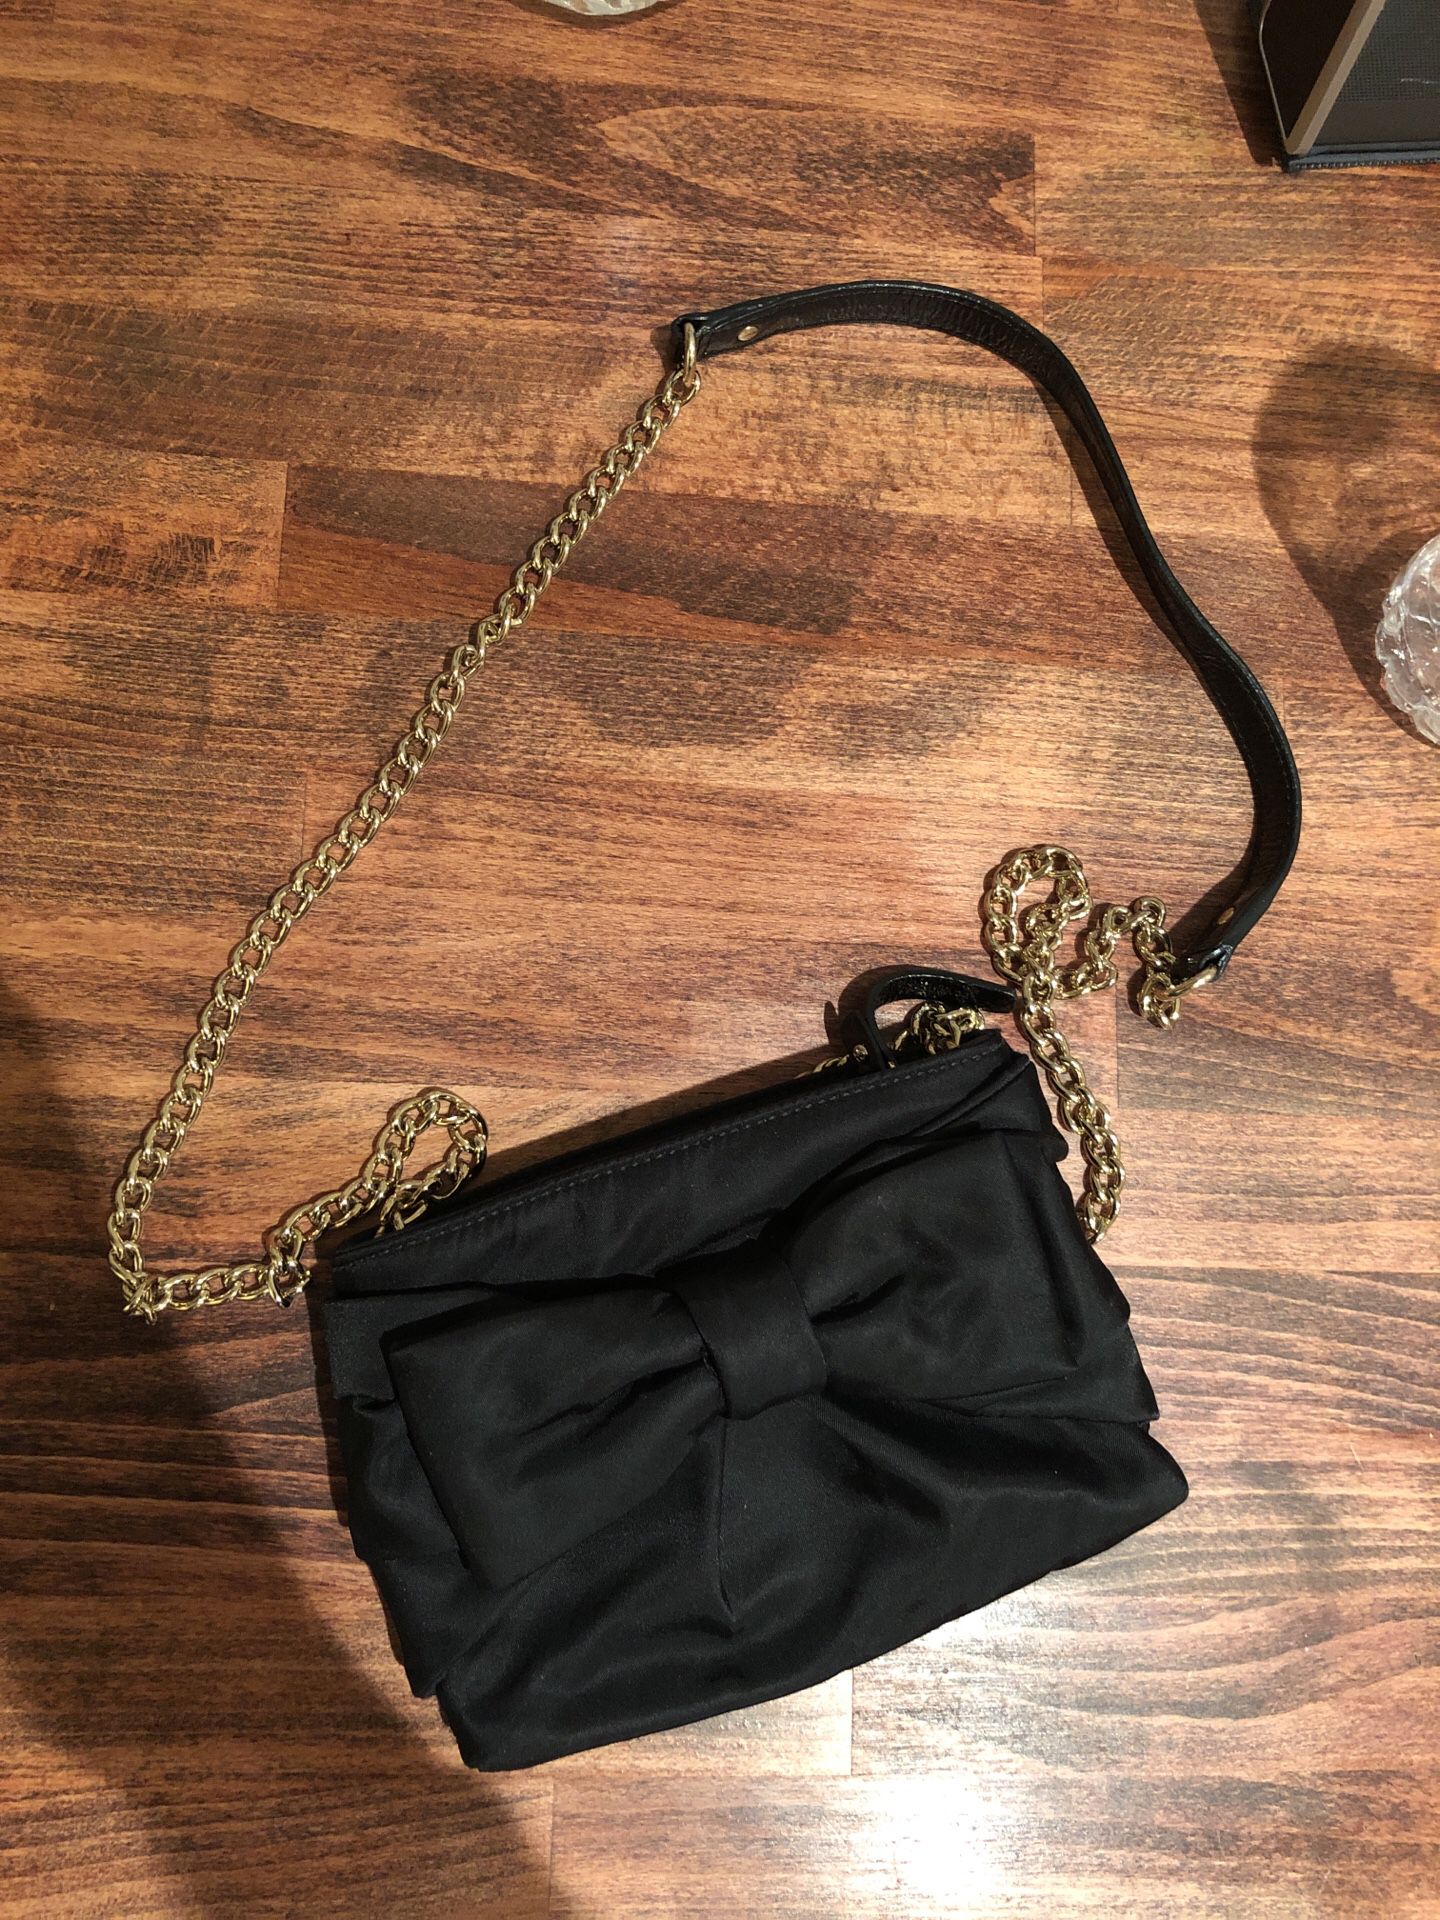 Kate spade small black bow purse with gold chain